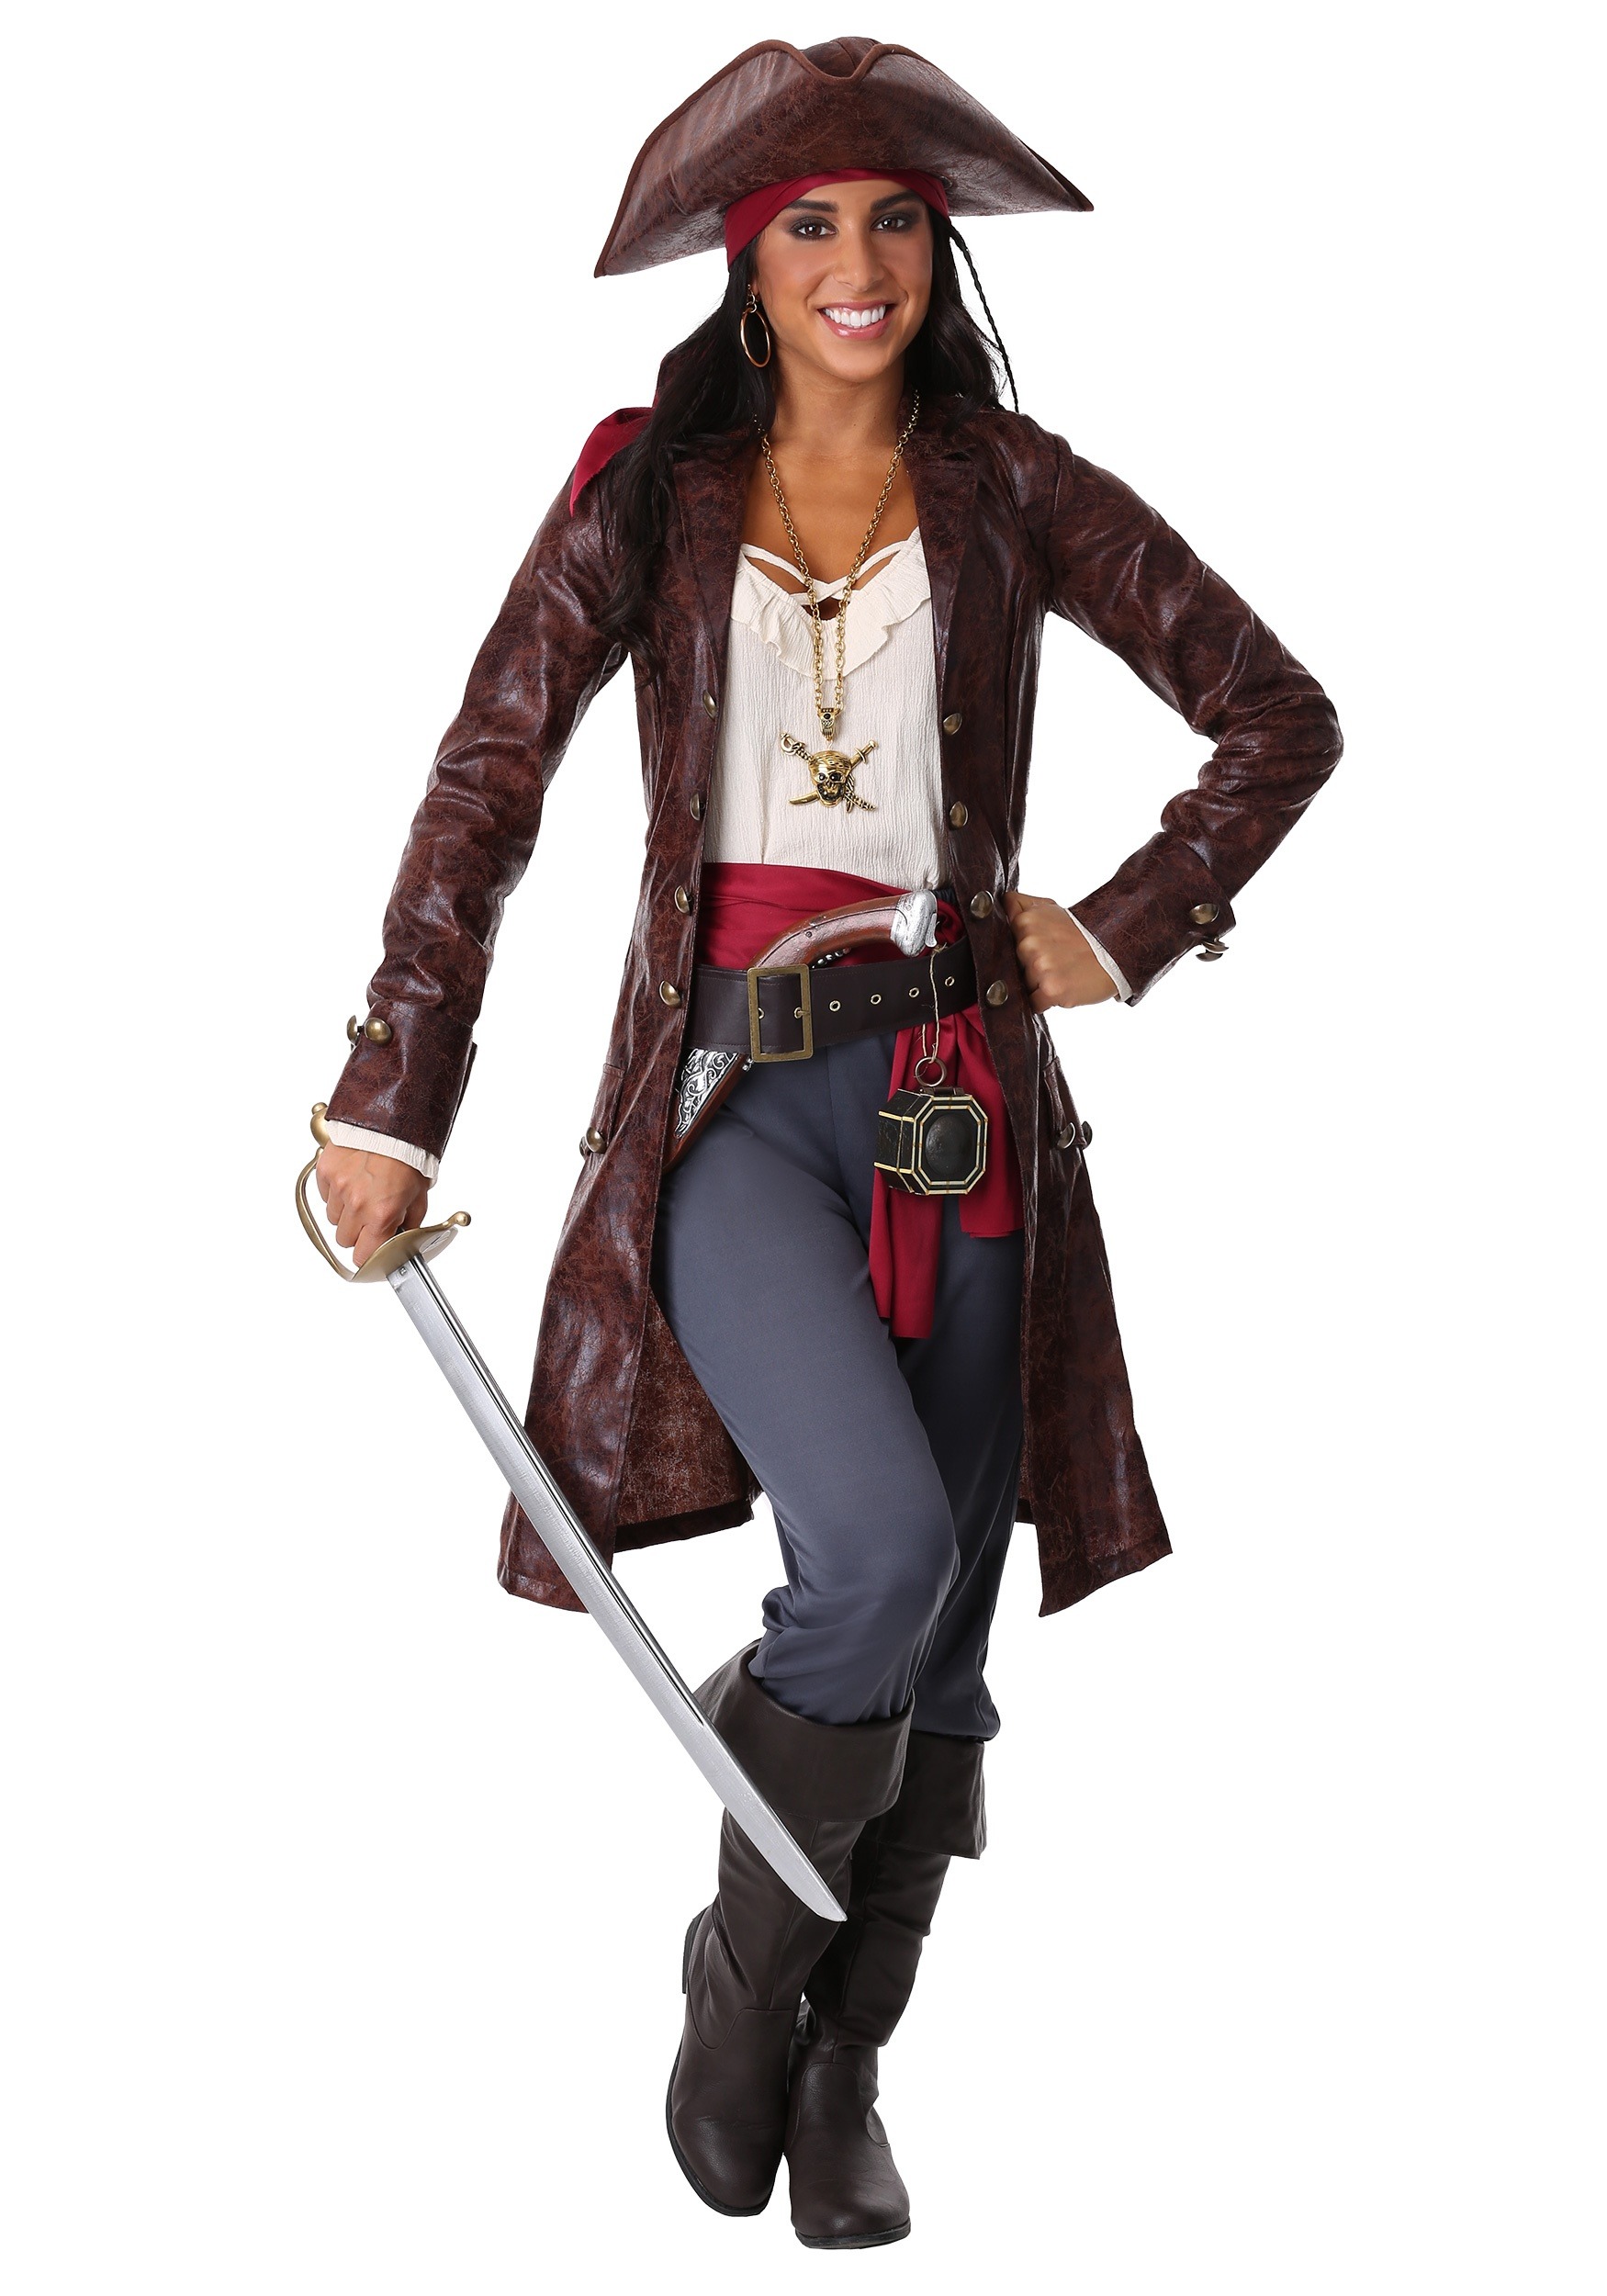 Photos - Fancy Dress FUN Costumes Plus Size Pretty Pirate Captain Women's Costume Red/Brown